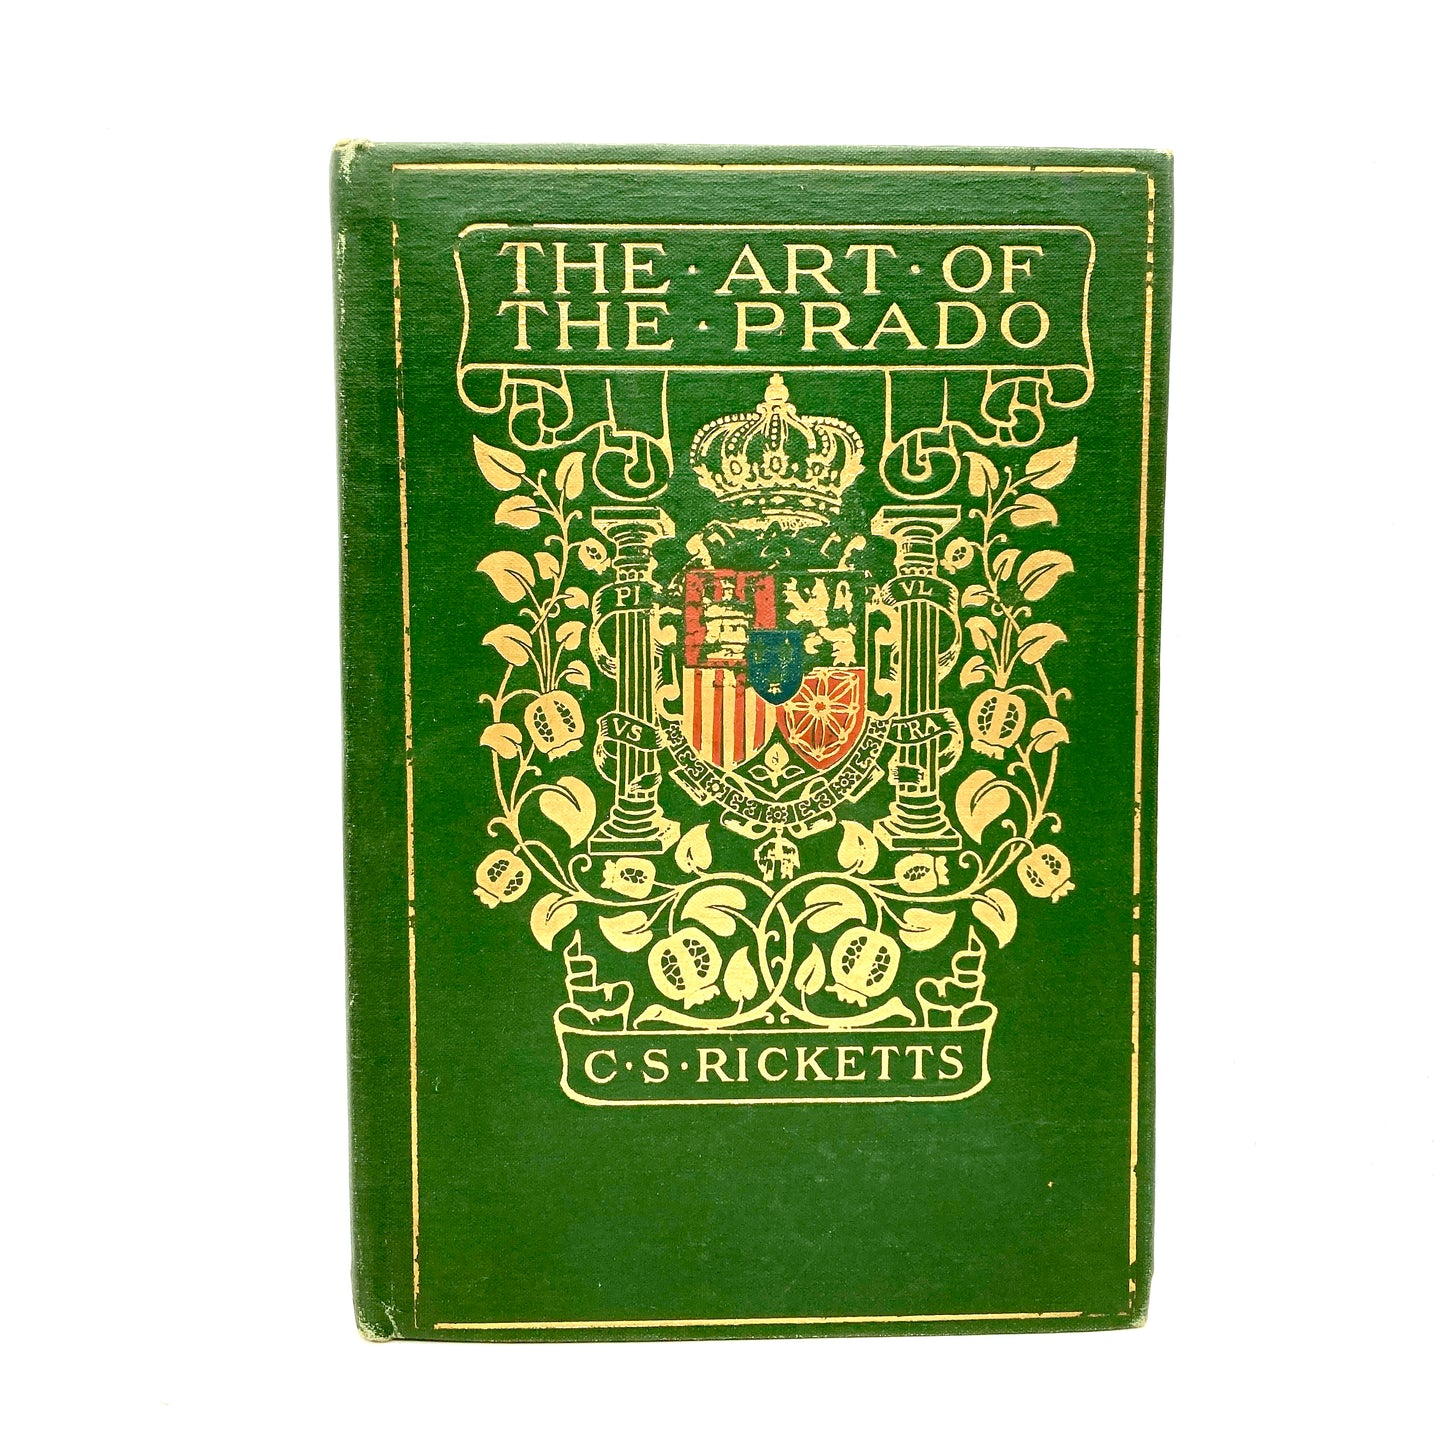 RICKETTS, C.S. "The Art of the Prado" [L.C. Page, 1907] 1st Edition/1st Print - Buzz Bookstore